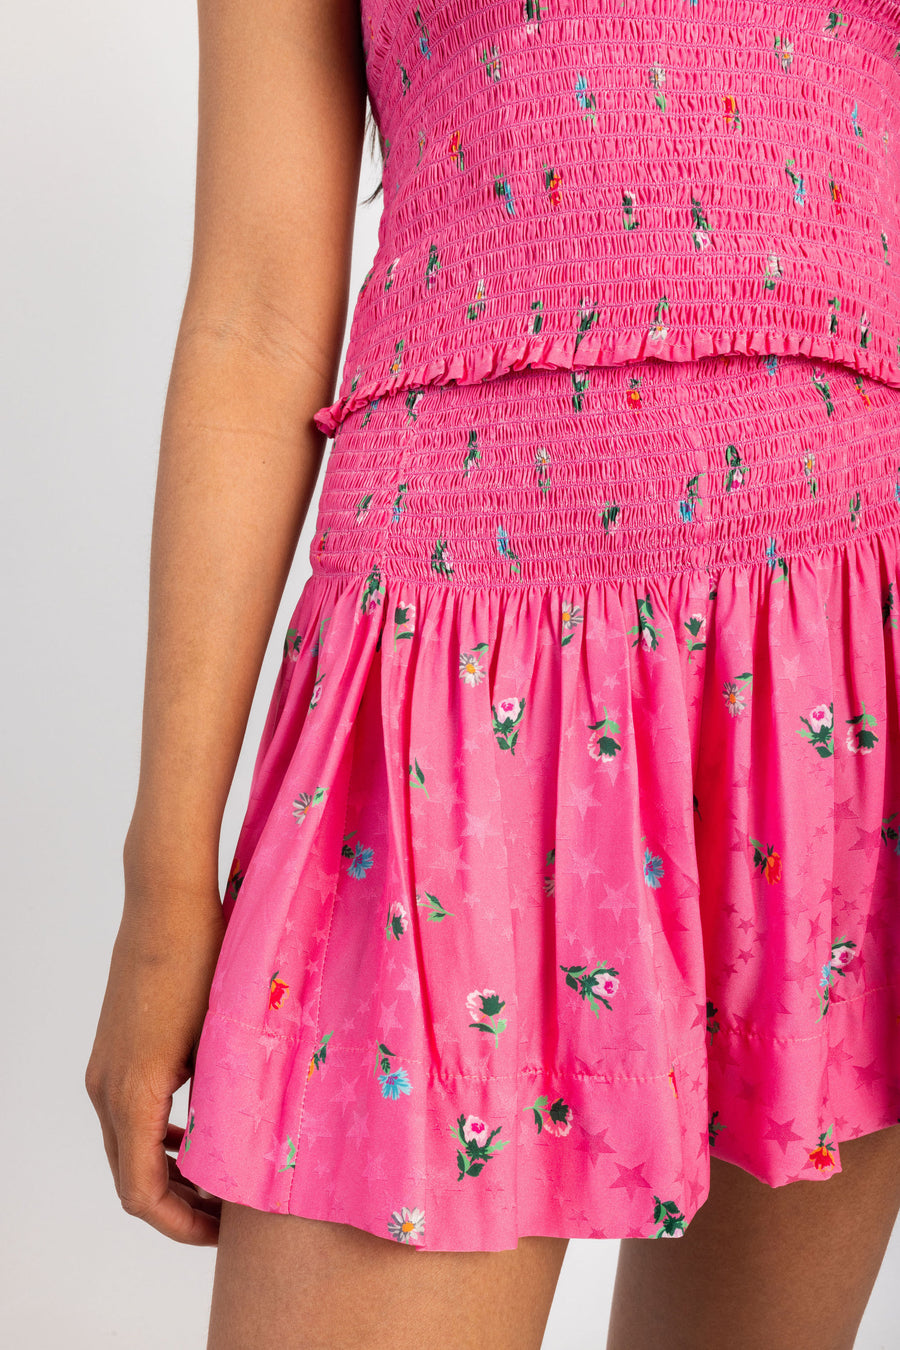 Erica Skirt Whimsical Pink *Limited*Edition*